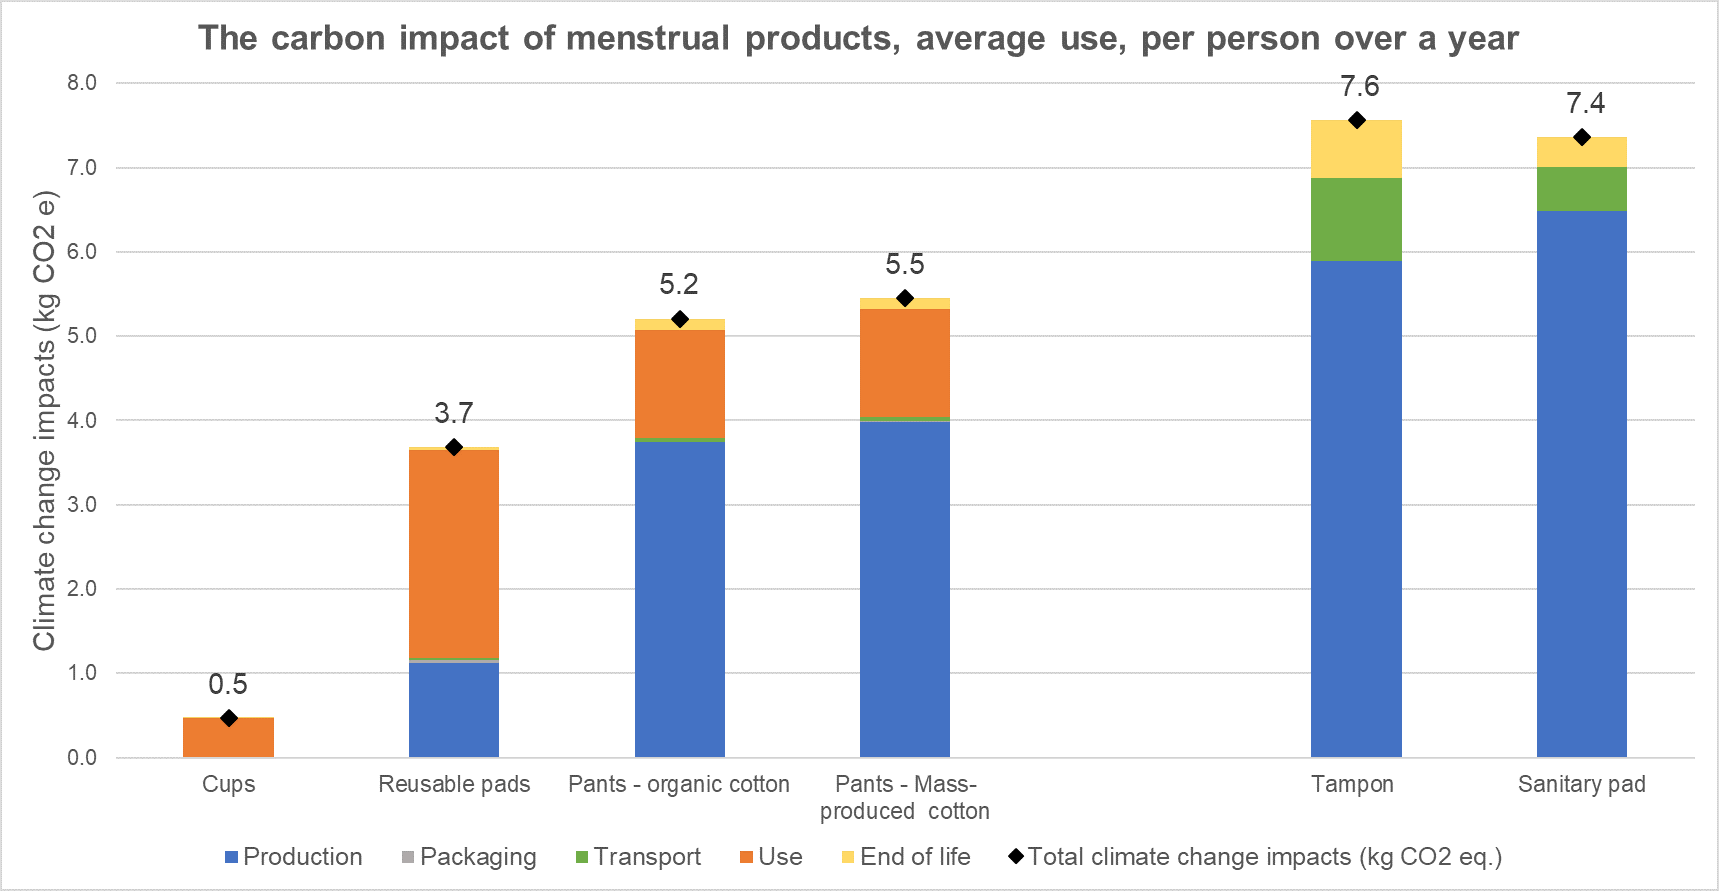 The carbon impacts of menstrual products